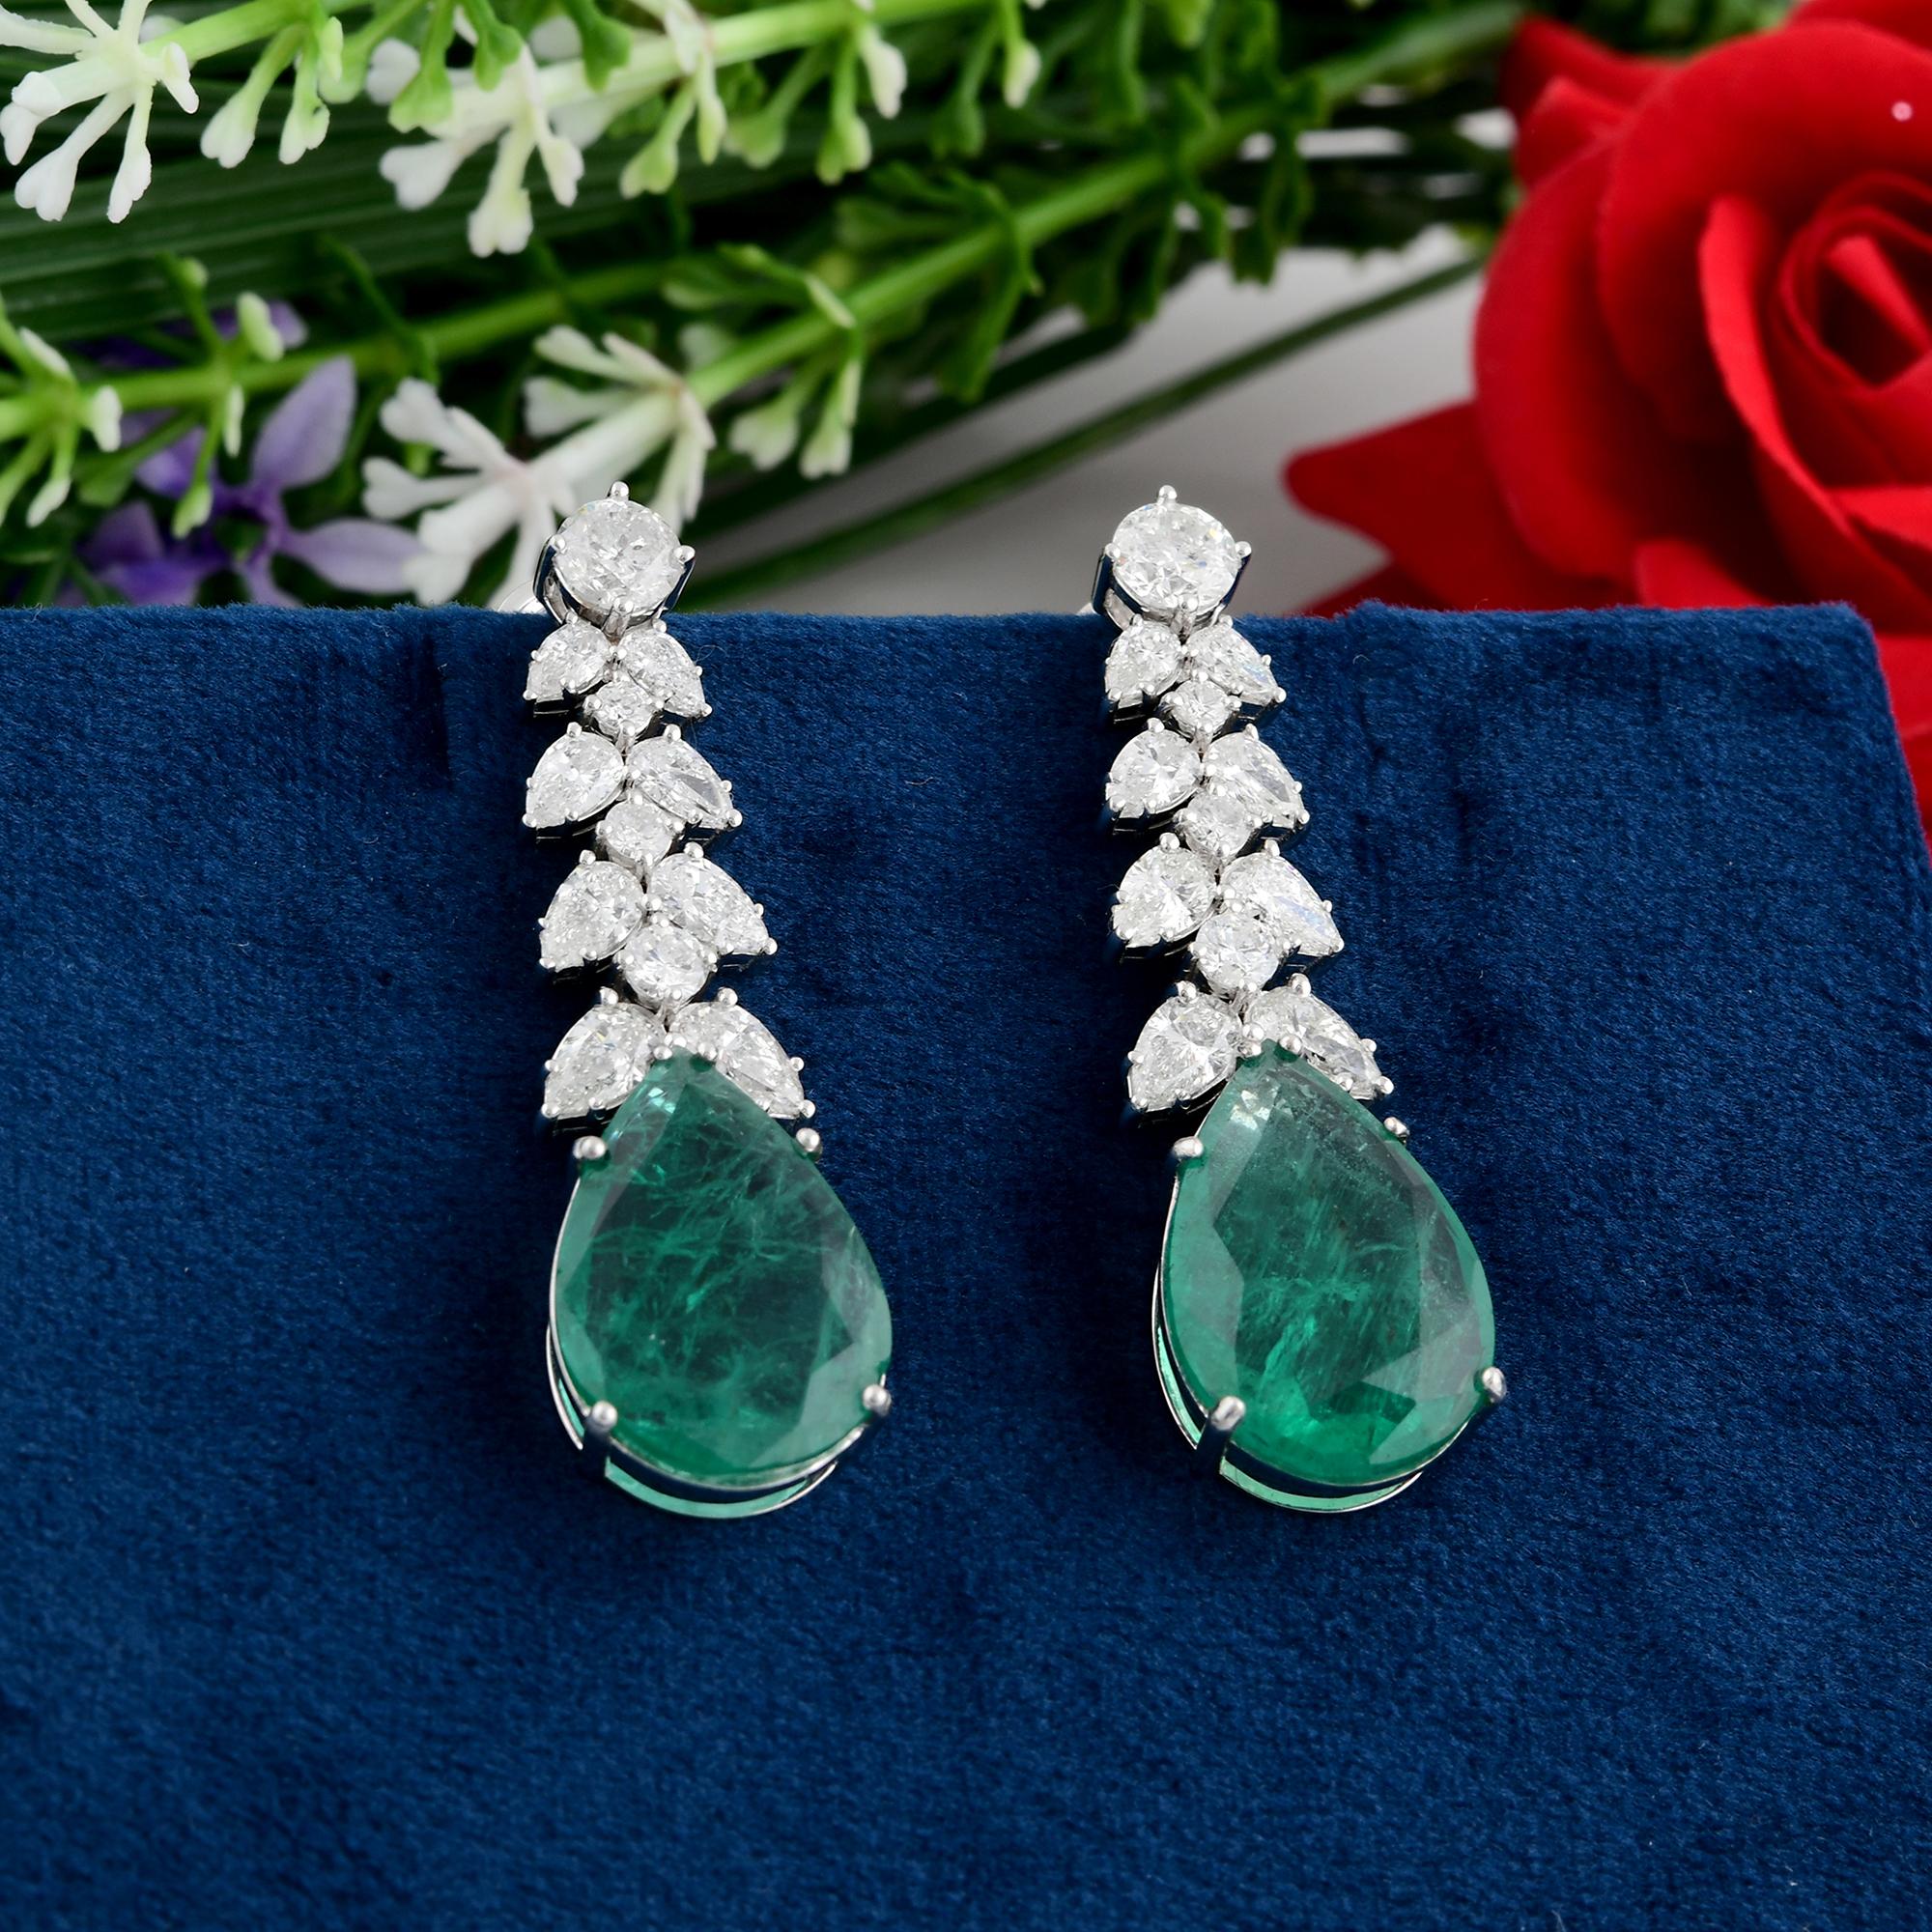 Item Code :- SEE-12851 (14k)
Gross Wt. :- 9.67 gm
14k Solid White Gold Wt. :- 6.66 gm
Natural Diamond Wt. :- 4.29 Ct. ( AVERAGE DIAMOND CLARITY SI1-SI2 & COLOR H-I )
Zambian Emerald Wt. :- 10.79 Ct.
Earrings Size :- 44 mm approx.

✦